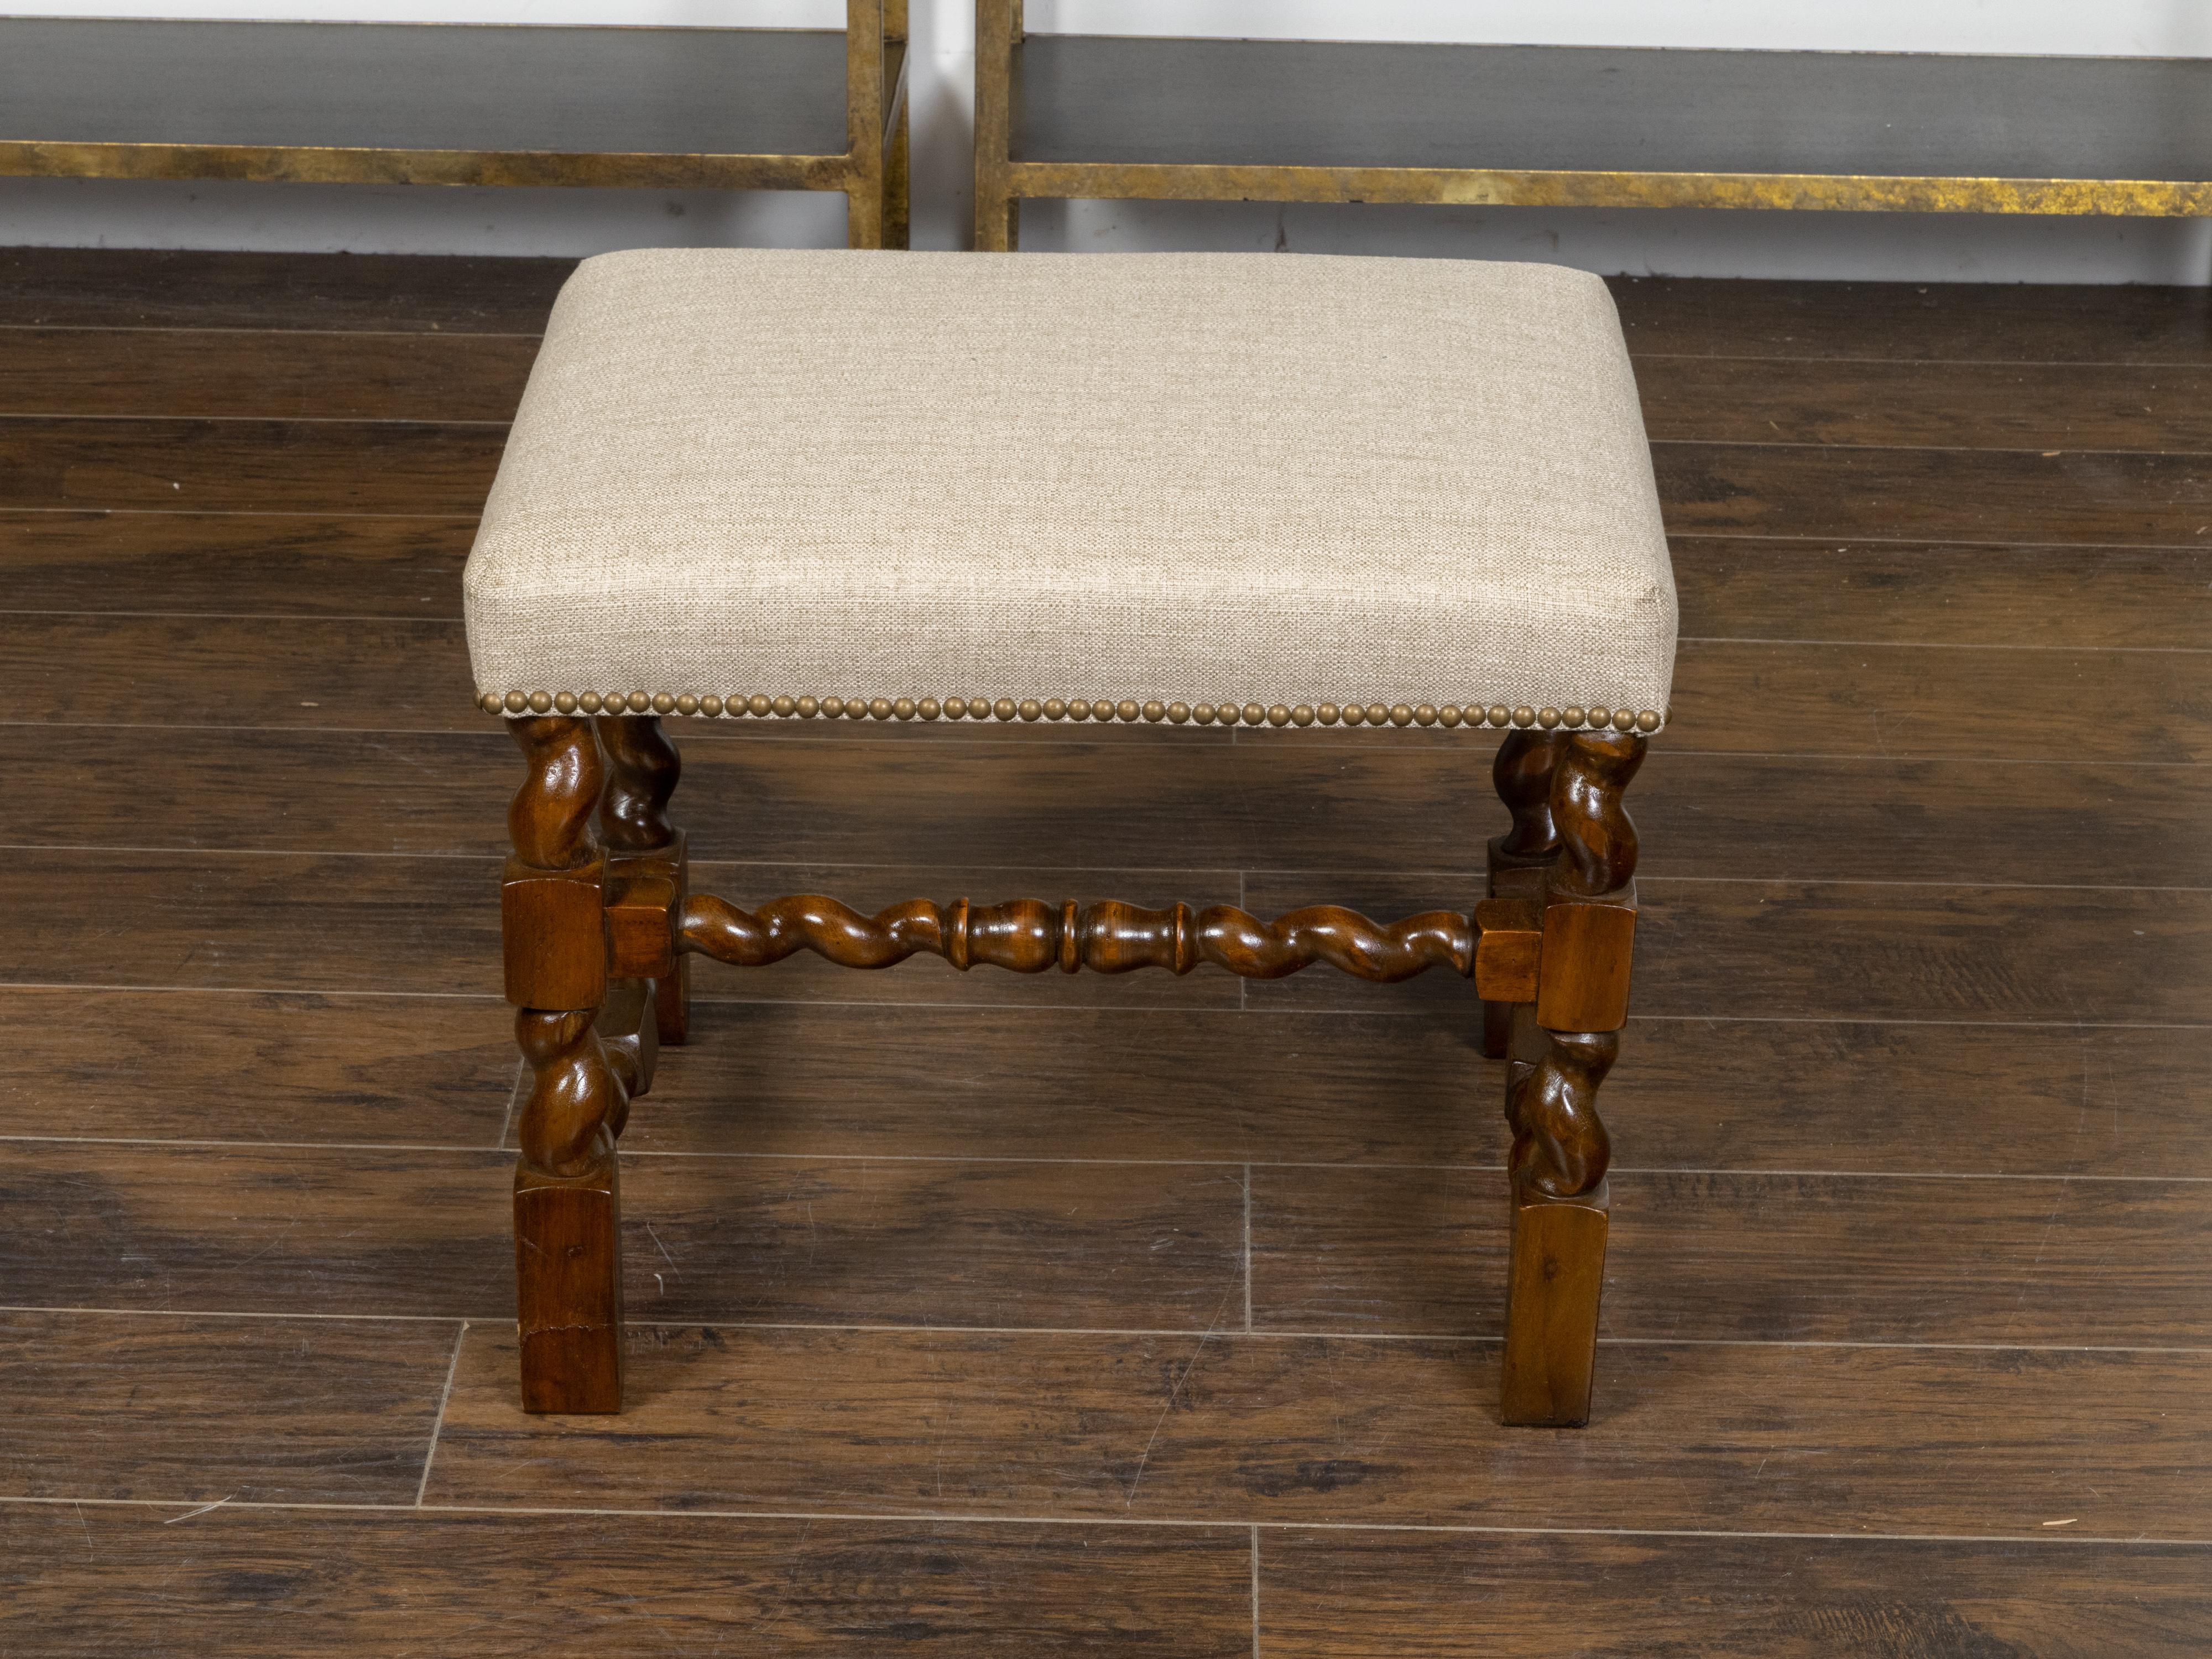 An English oak stool from the 19th century, with barley twist base, rectangular block joints, new custom made linen upholstery and brass nailhead trim. Created in England during the 19th century, this oak stool features a rectangular seat newly